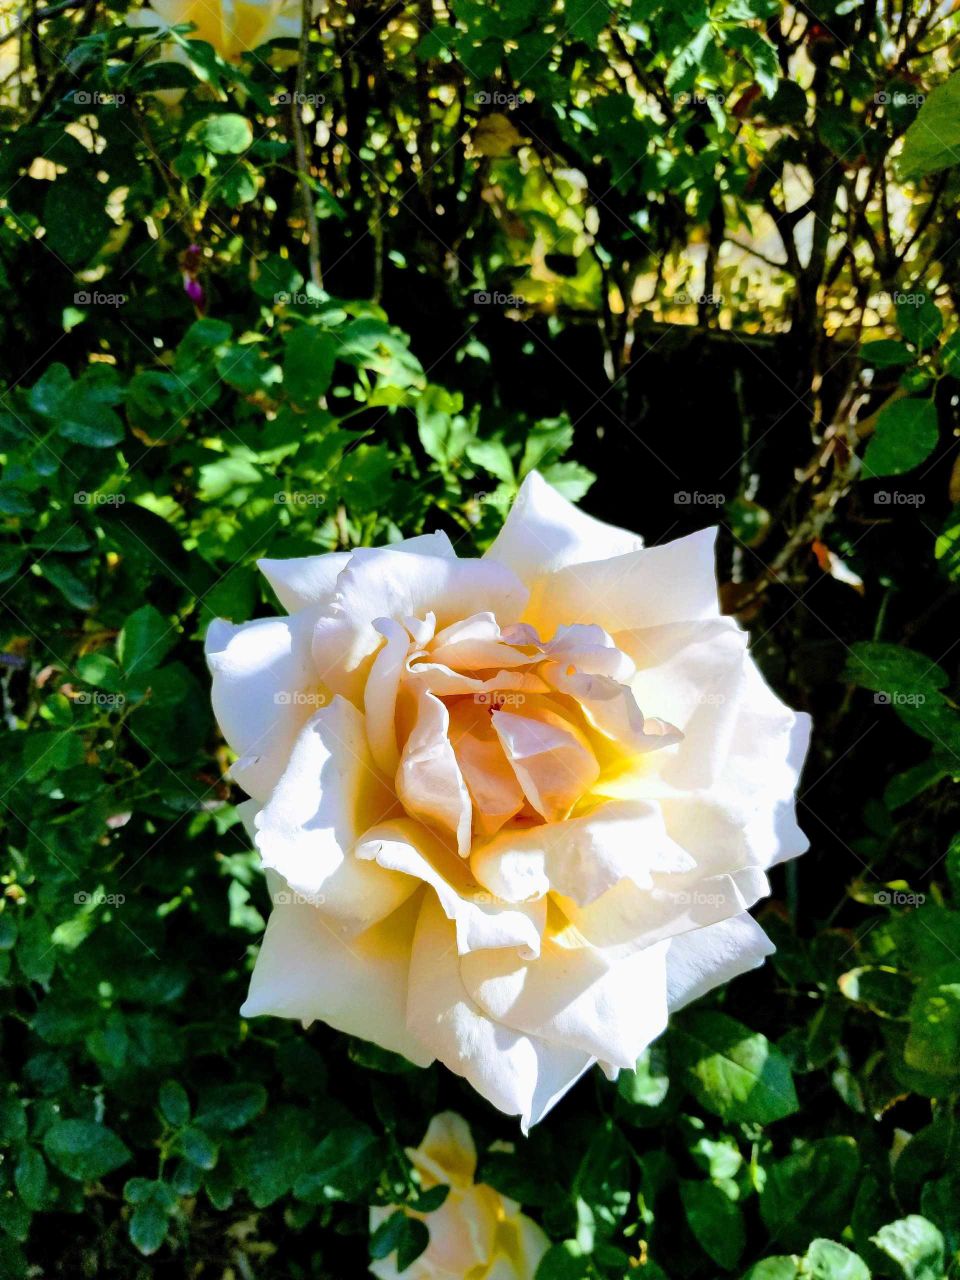 a photo of a rose in full bloom in the summer